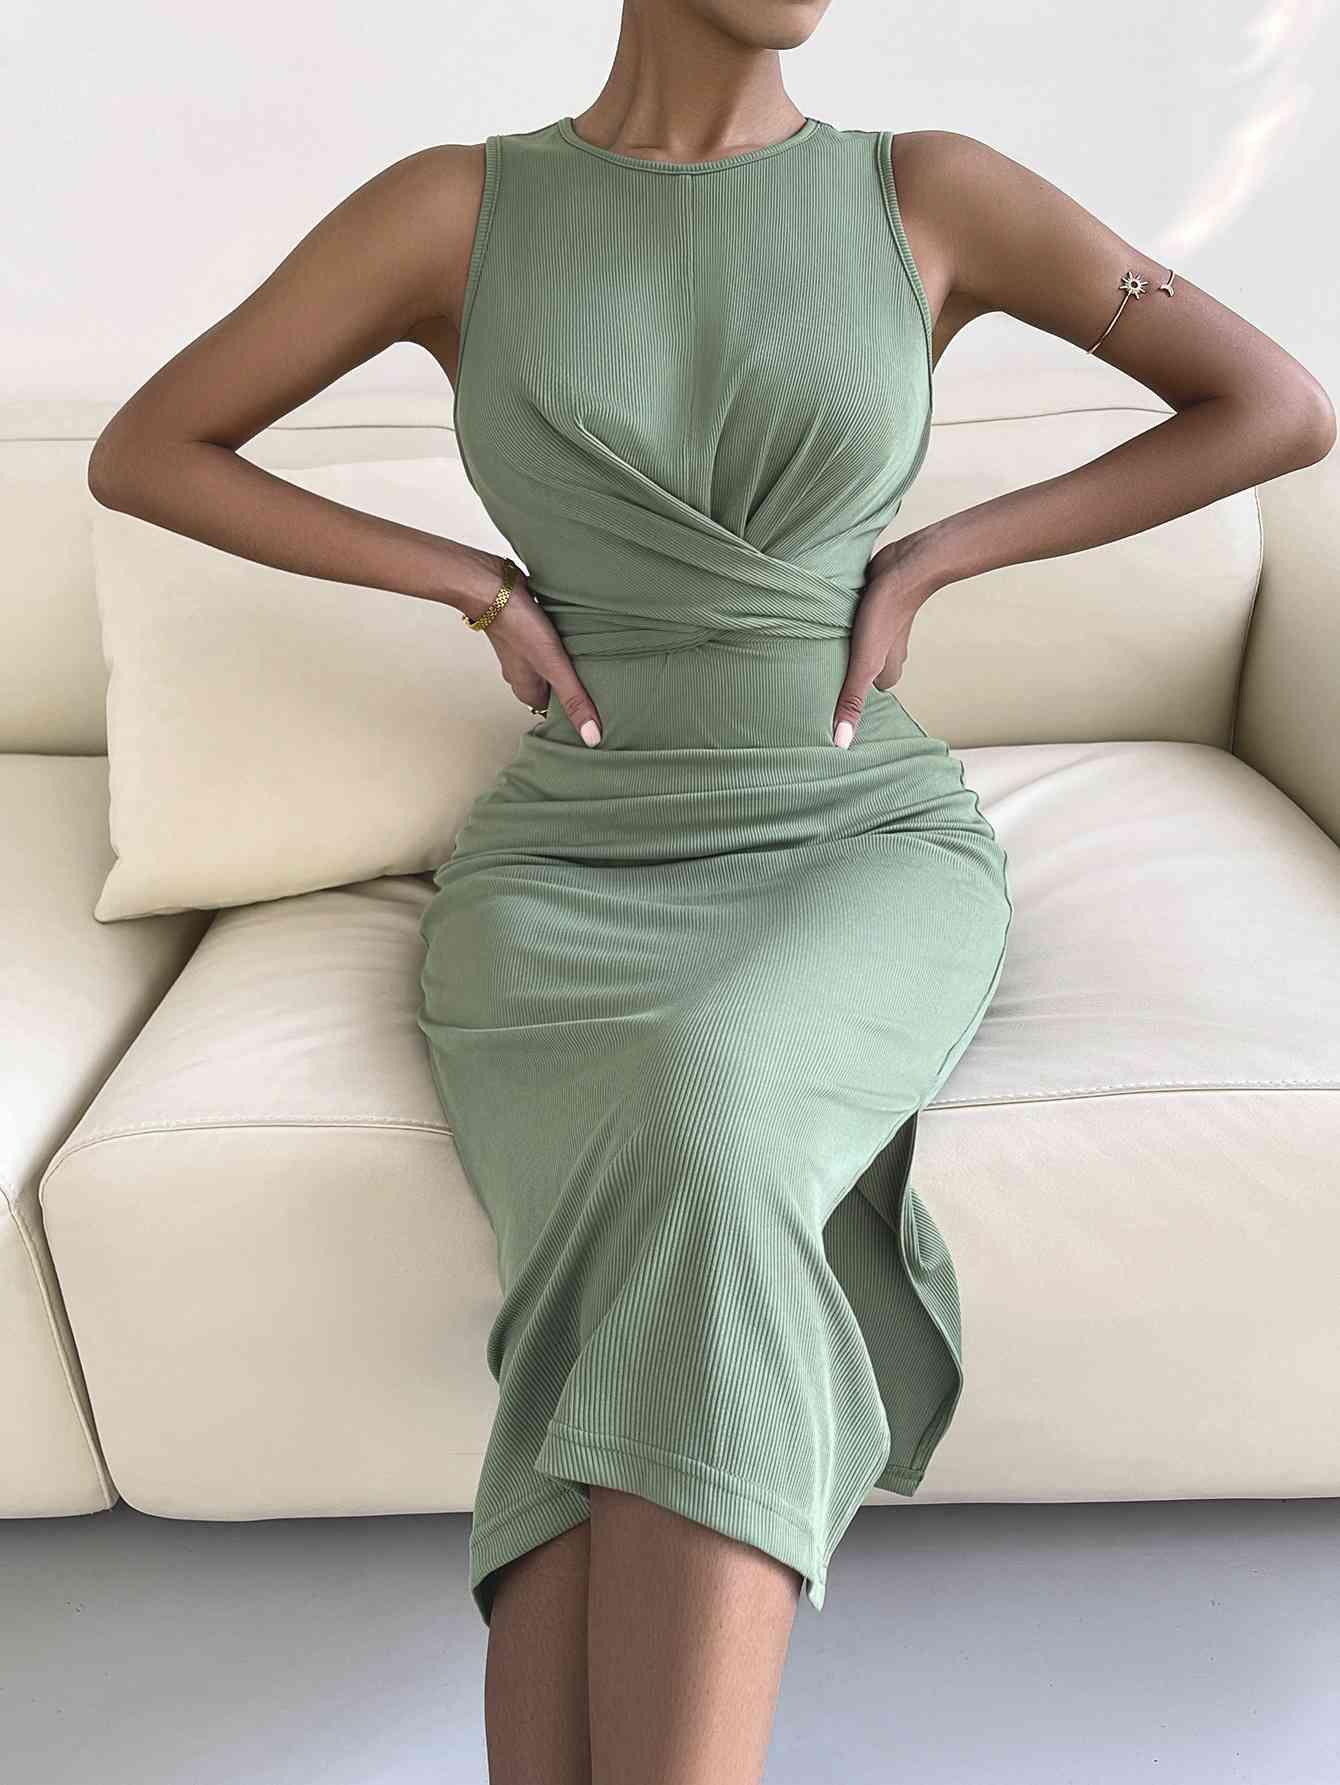 a woman in a green dress sitting on a couch